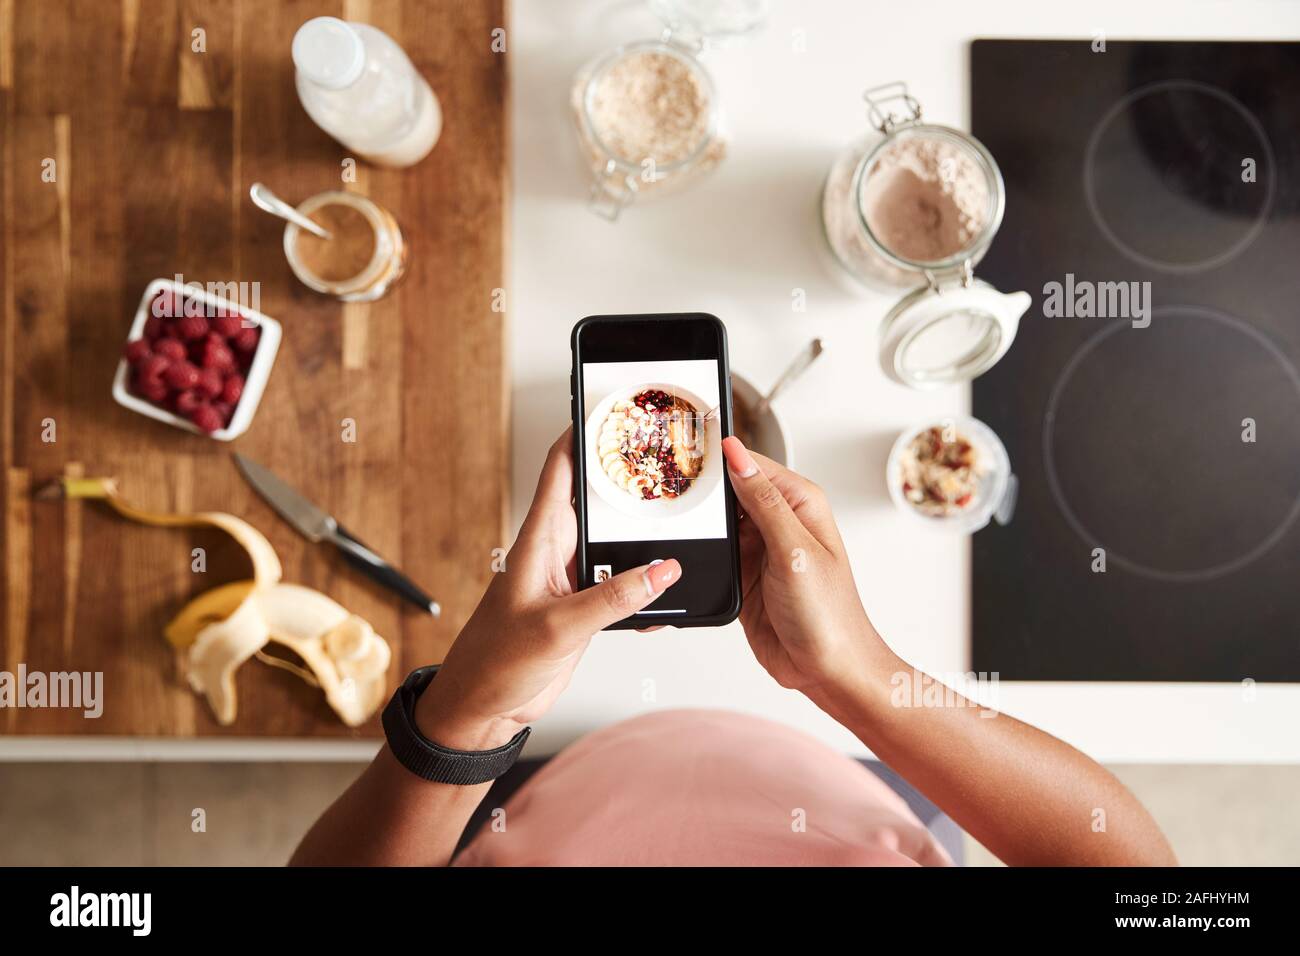 Overhead Shot Of Woman Taking Picture Of Healthy Breakfast On Mobile Phone At Home After Exercise Stock Photo